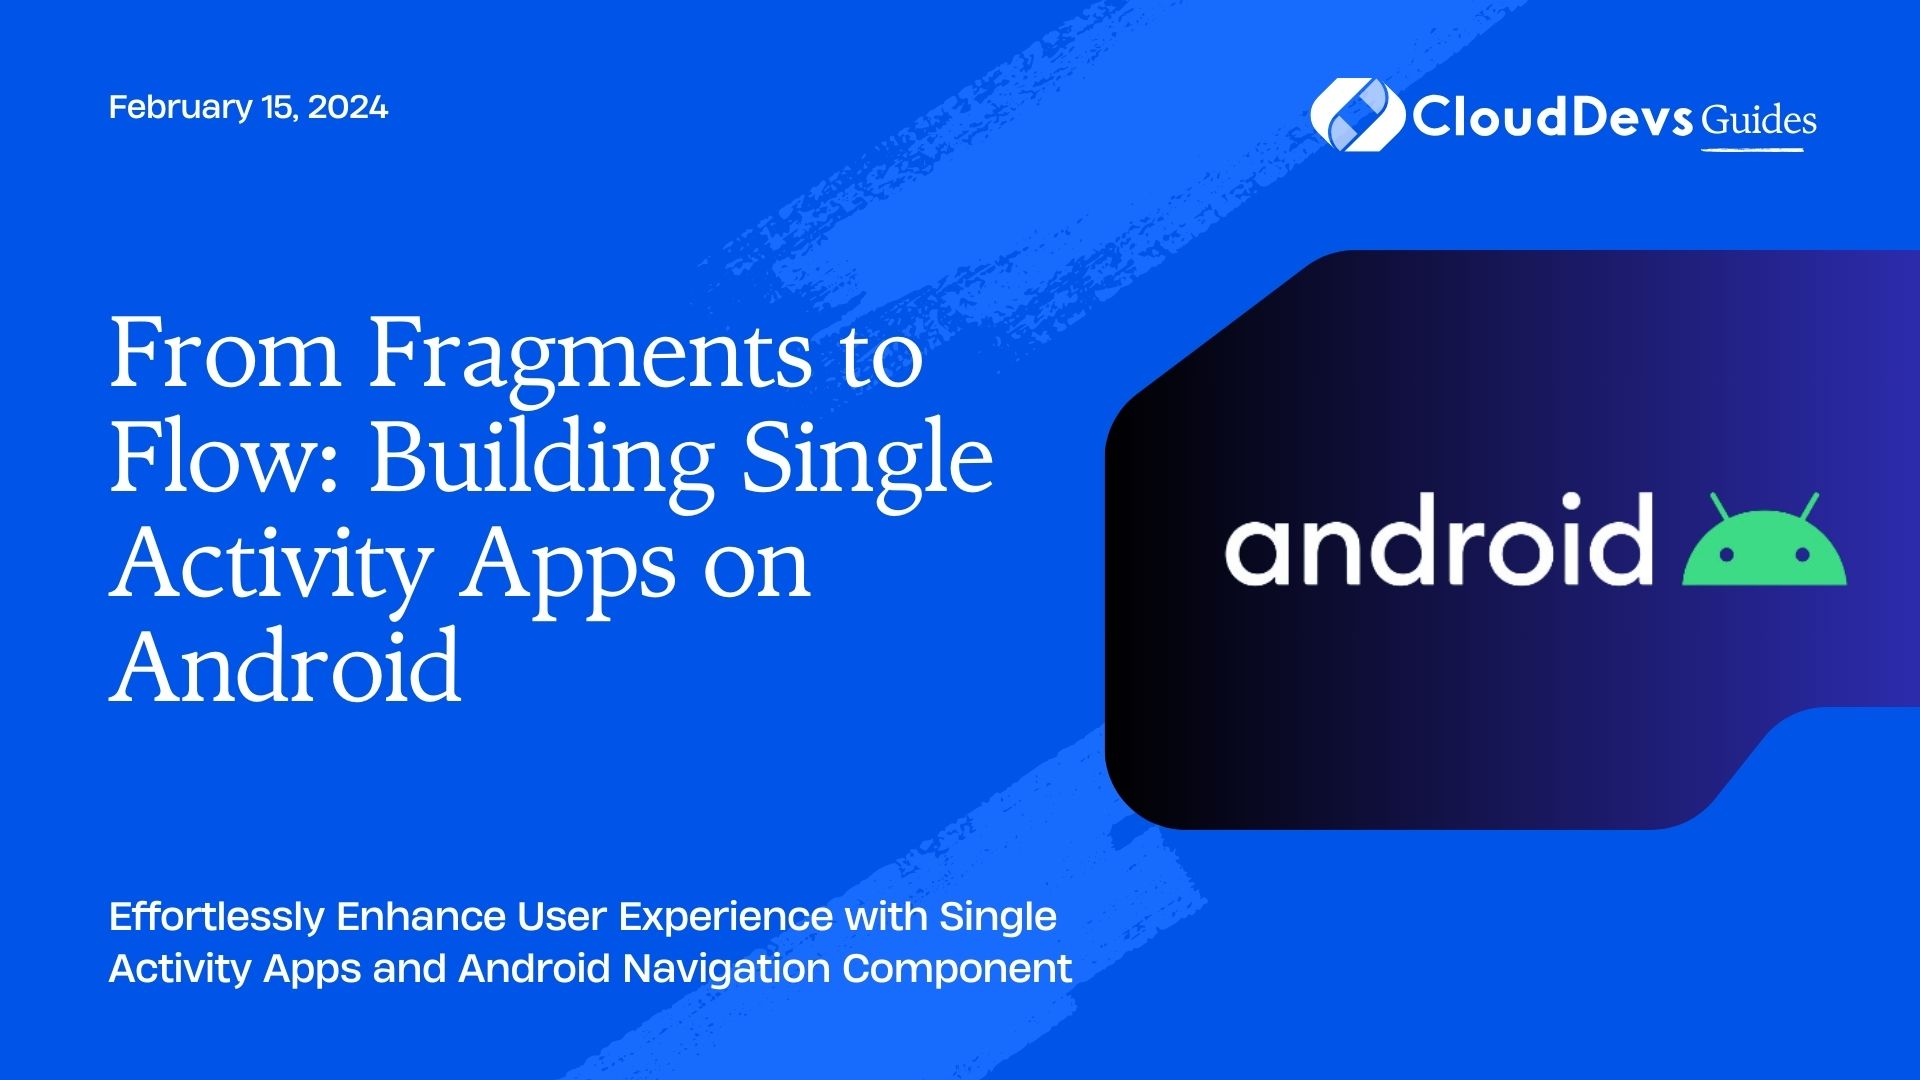 Android Navigation Component: Building a Single Activity App